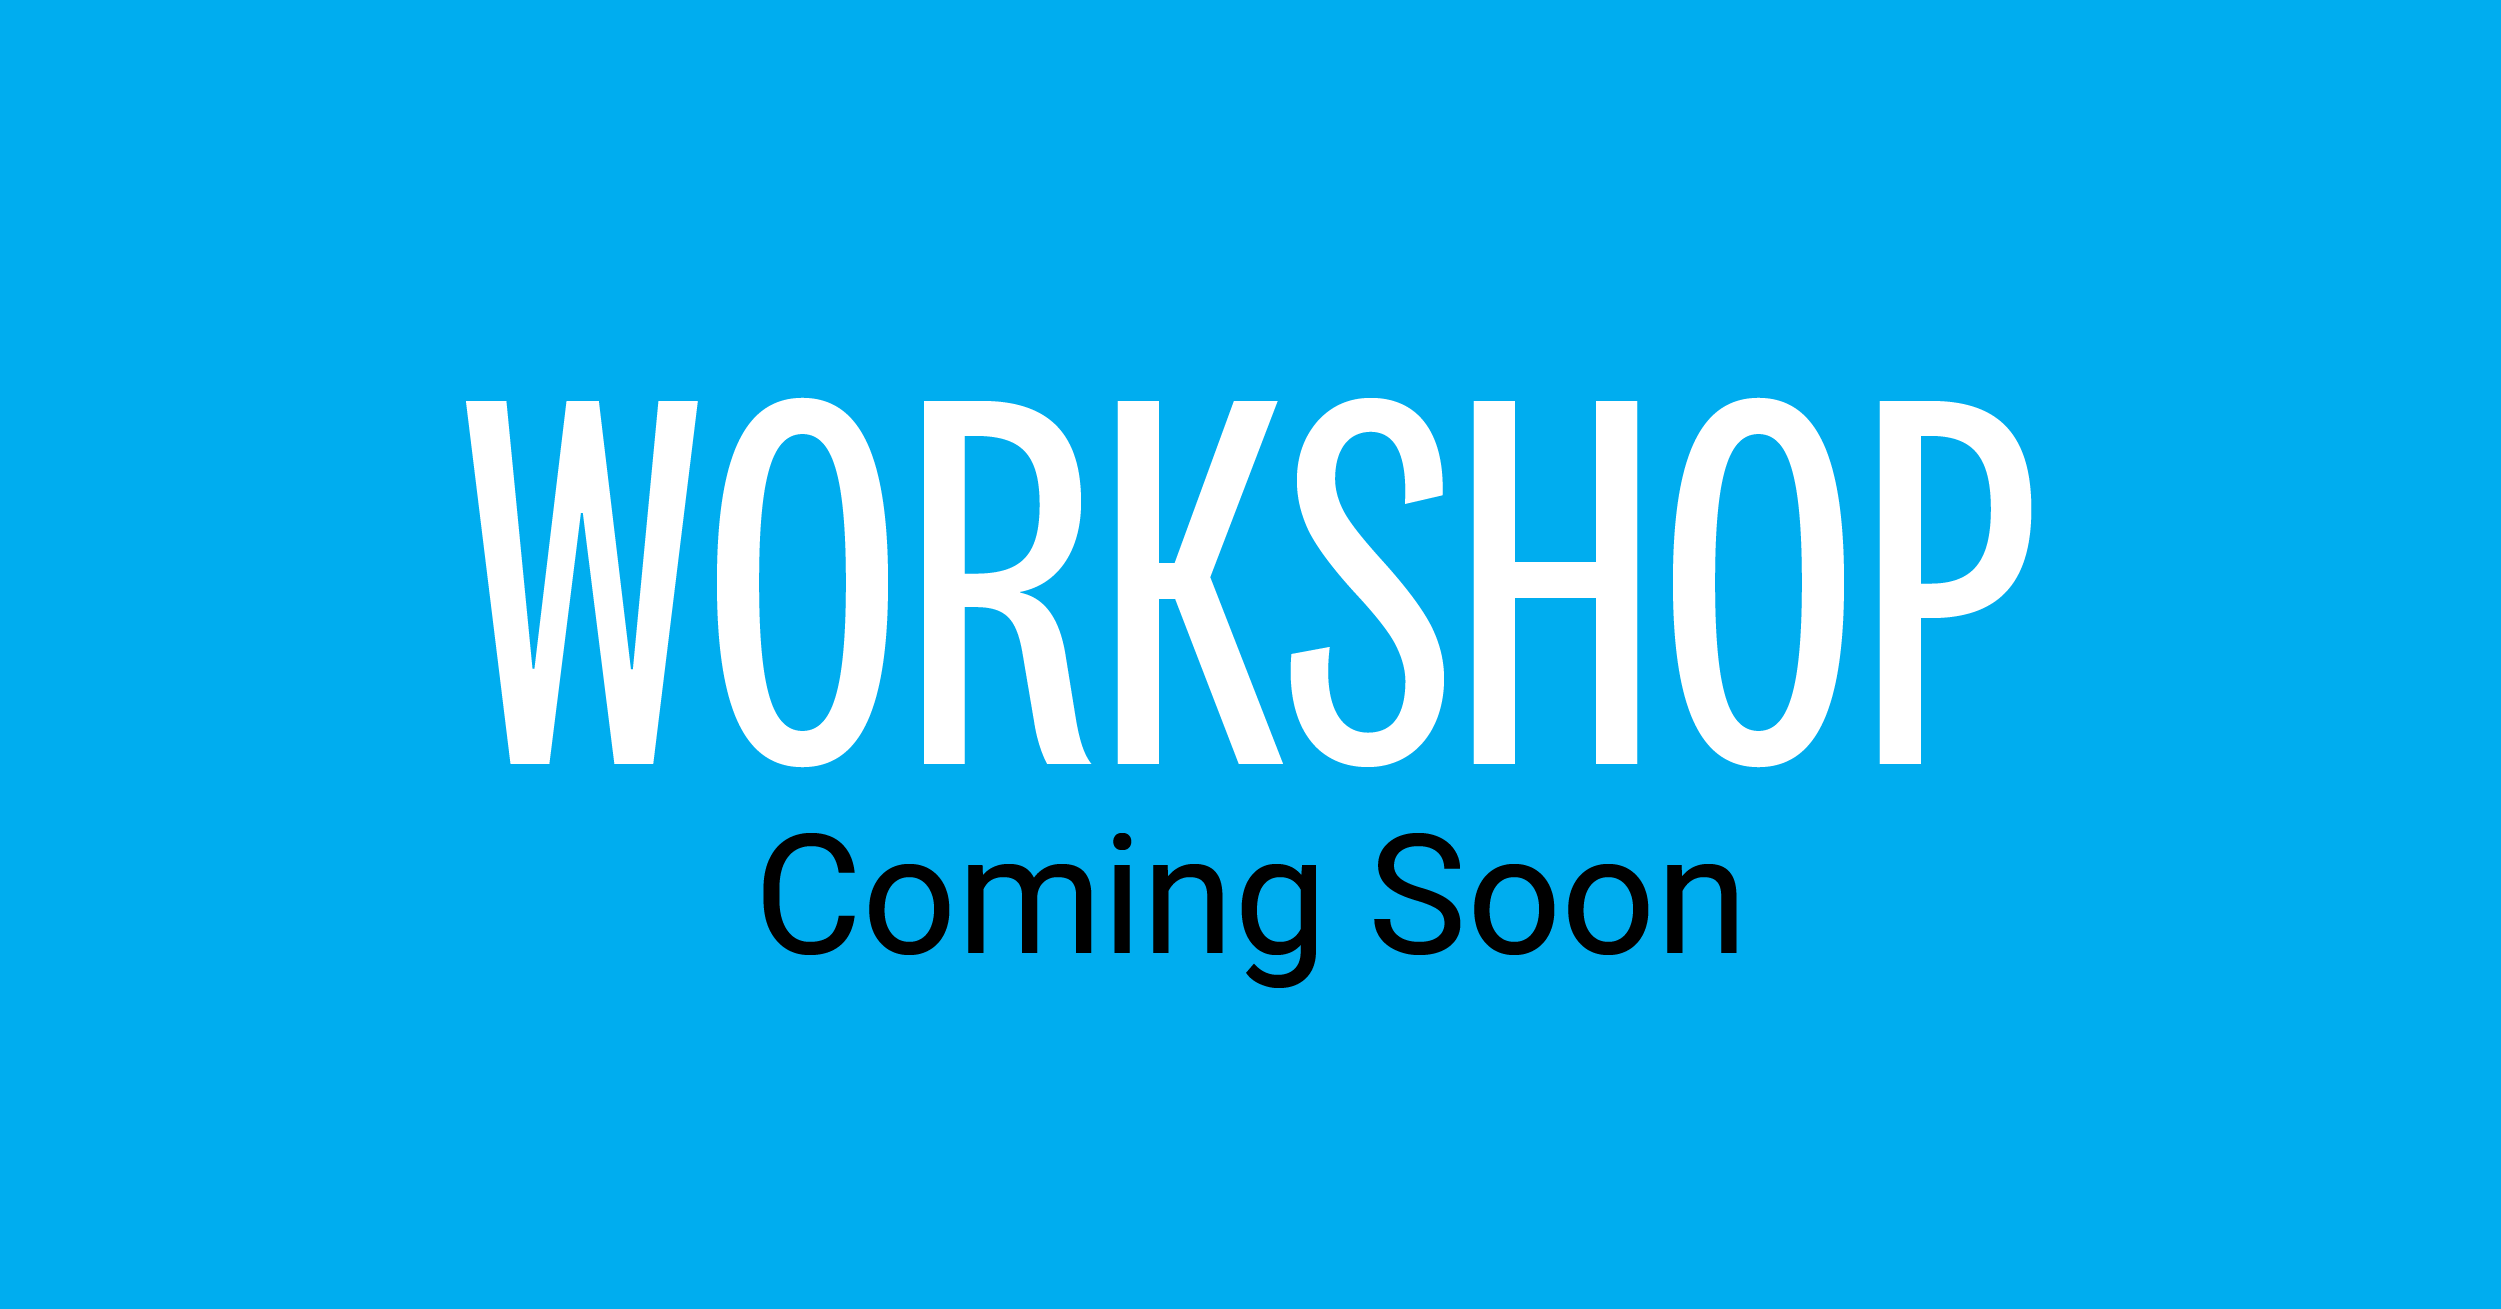 workshop-coming-soon-banner-1200x628px